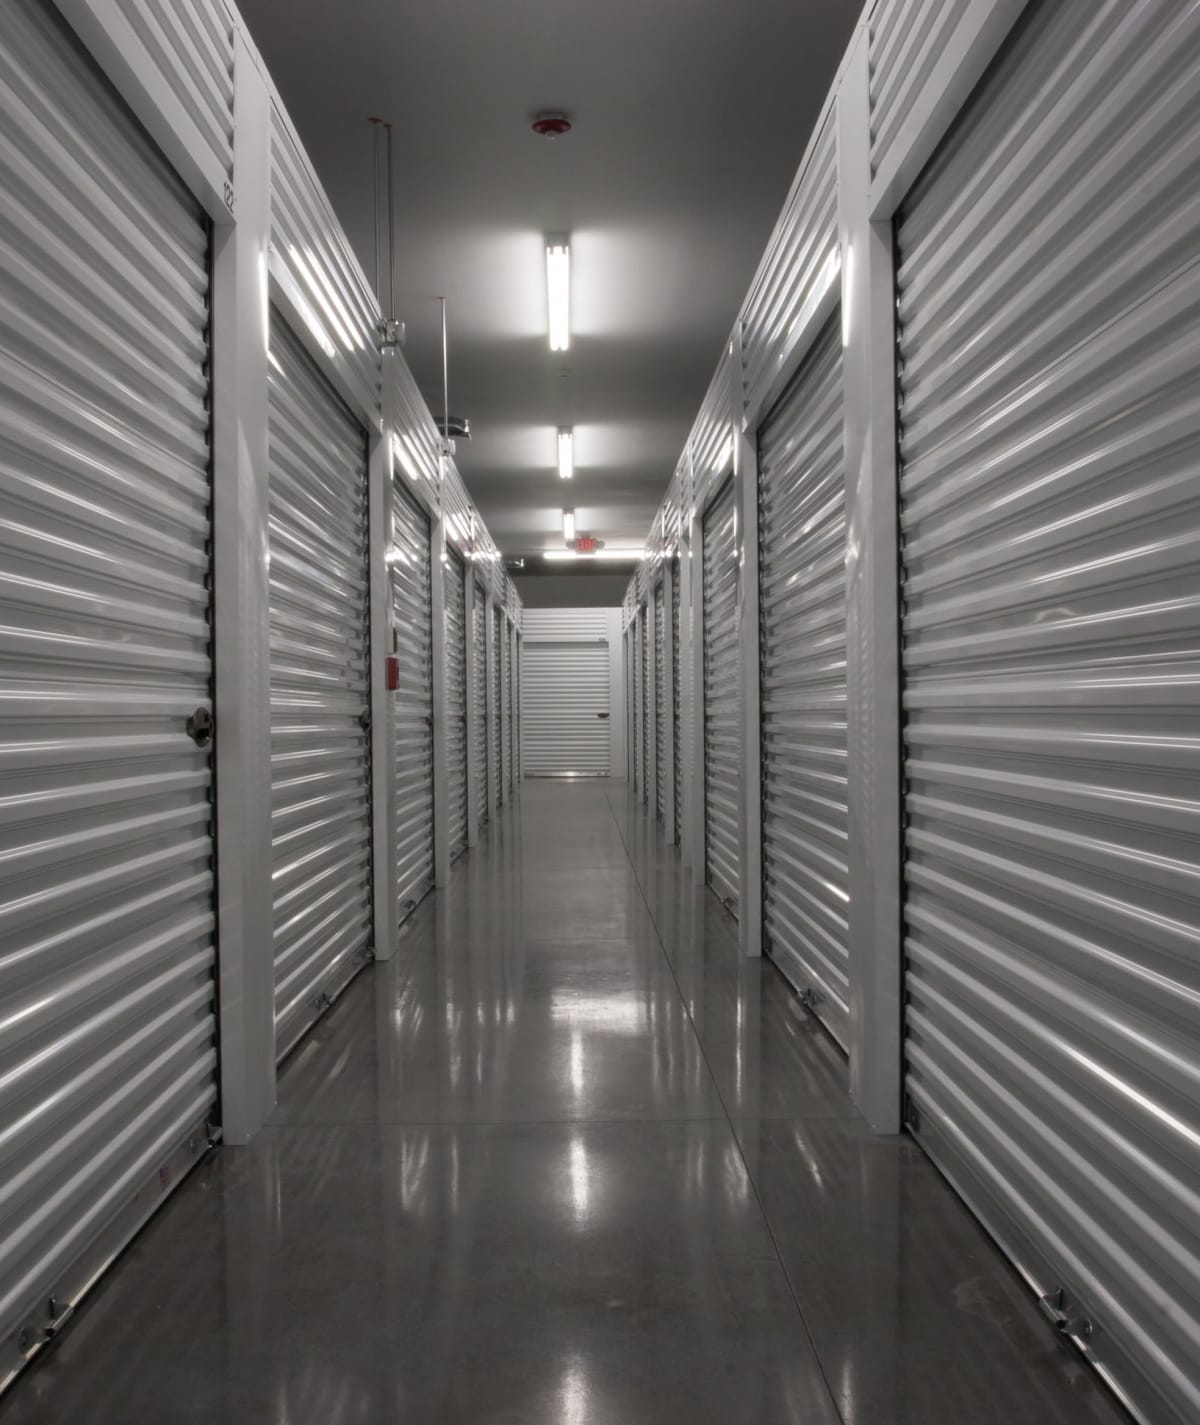 Contact us today at Excess Storage Smithfield Road in Knightdale, North Carolina